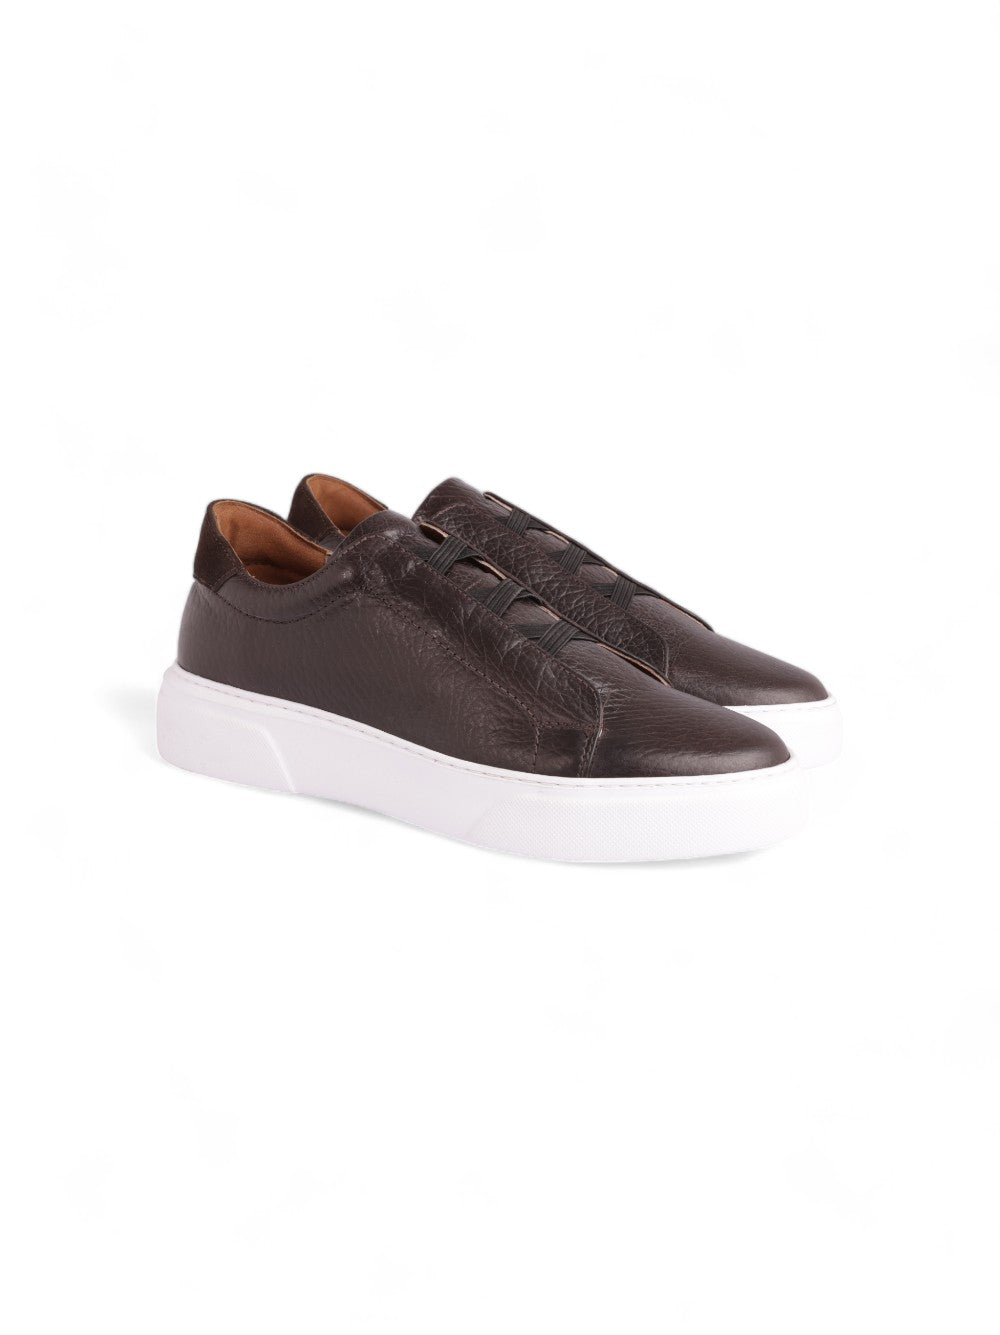 Casual Brown Shoes With White Insole